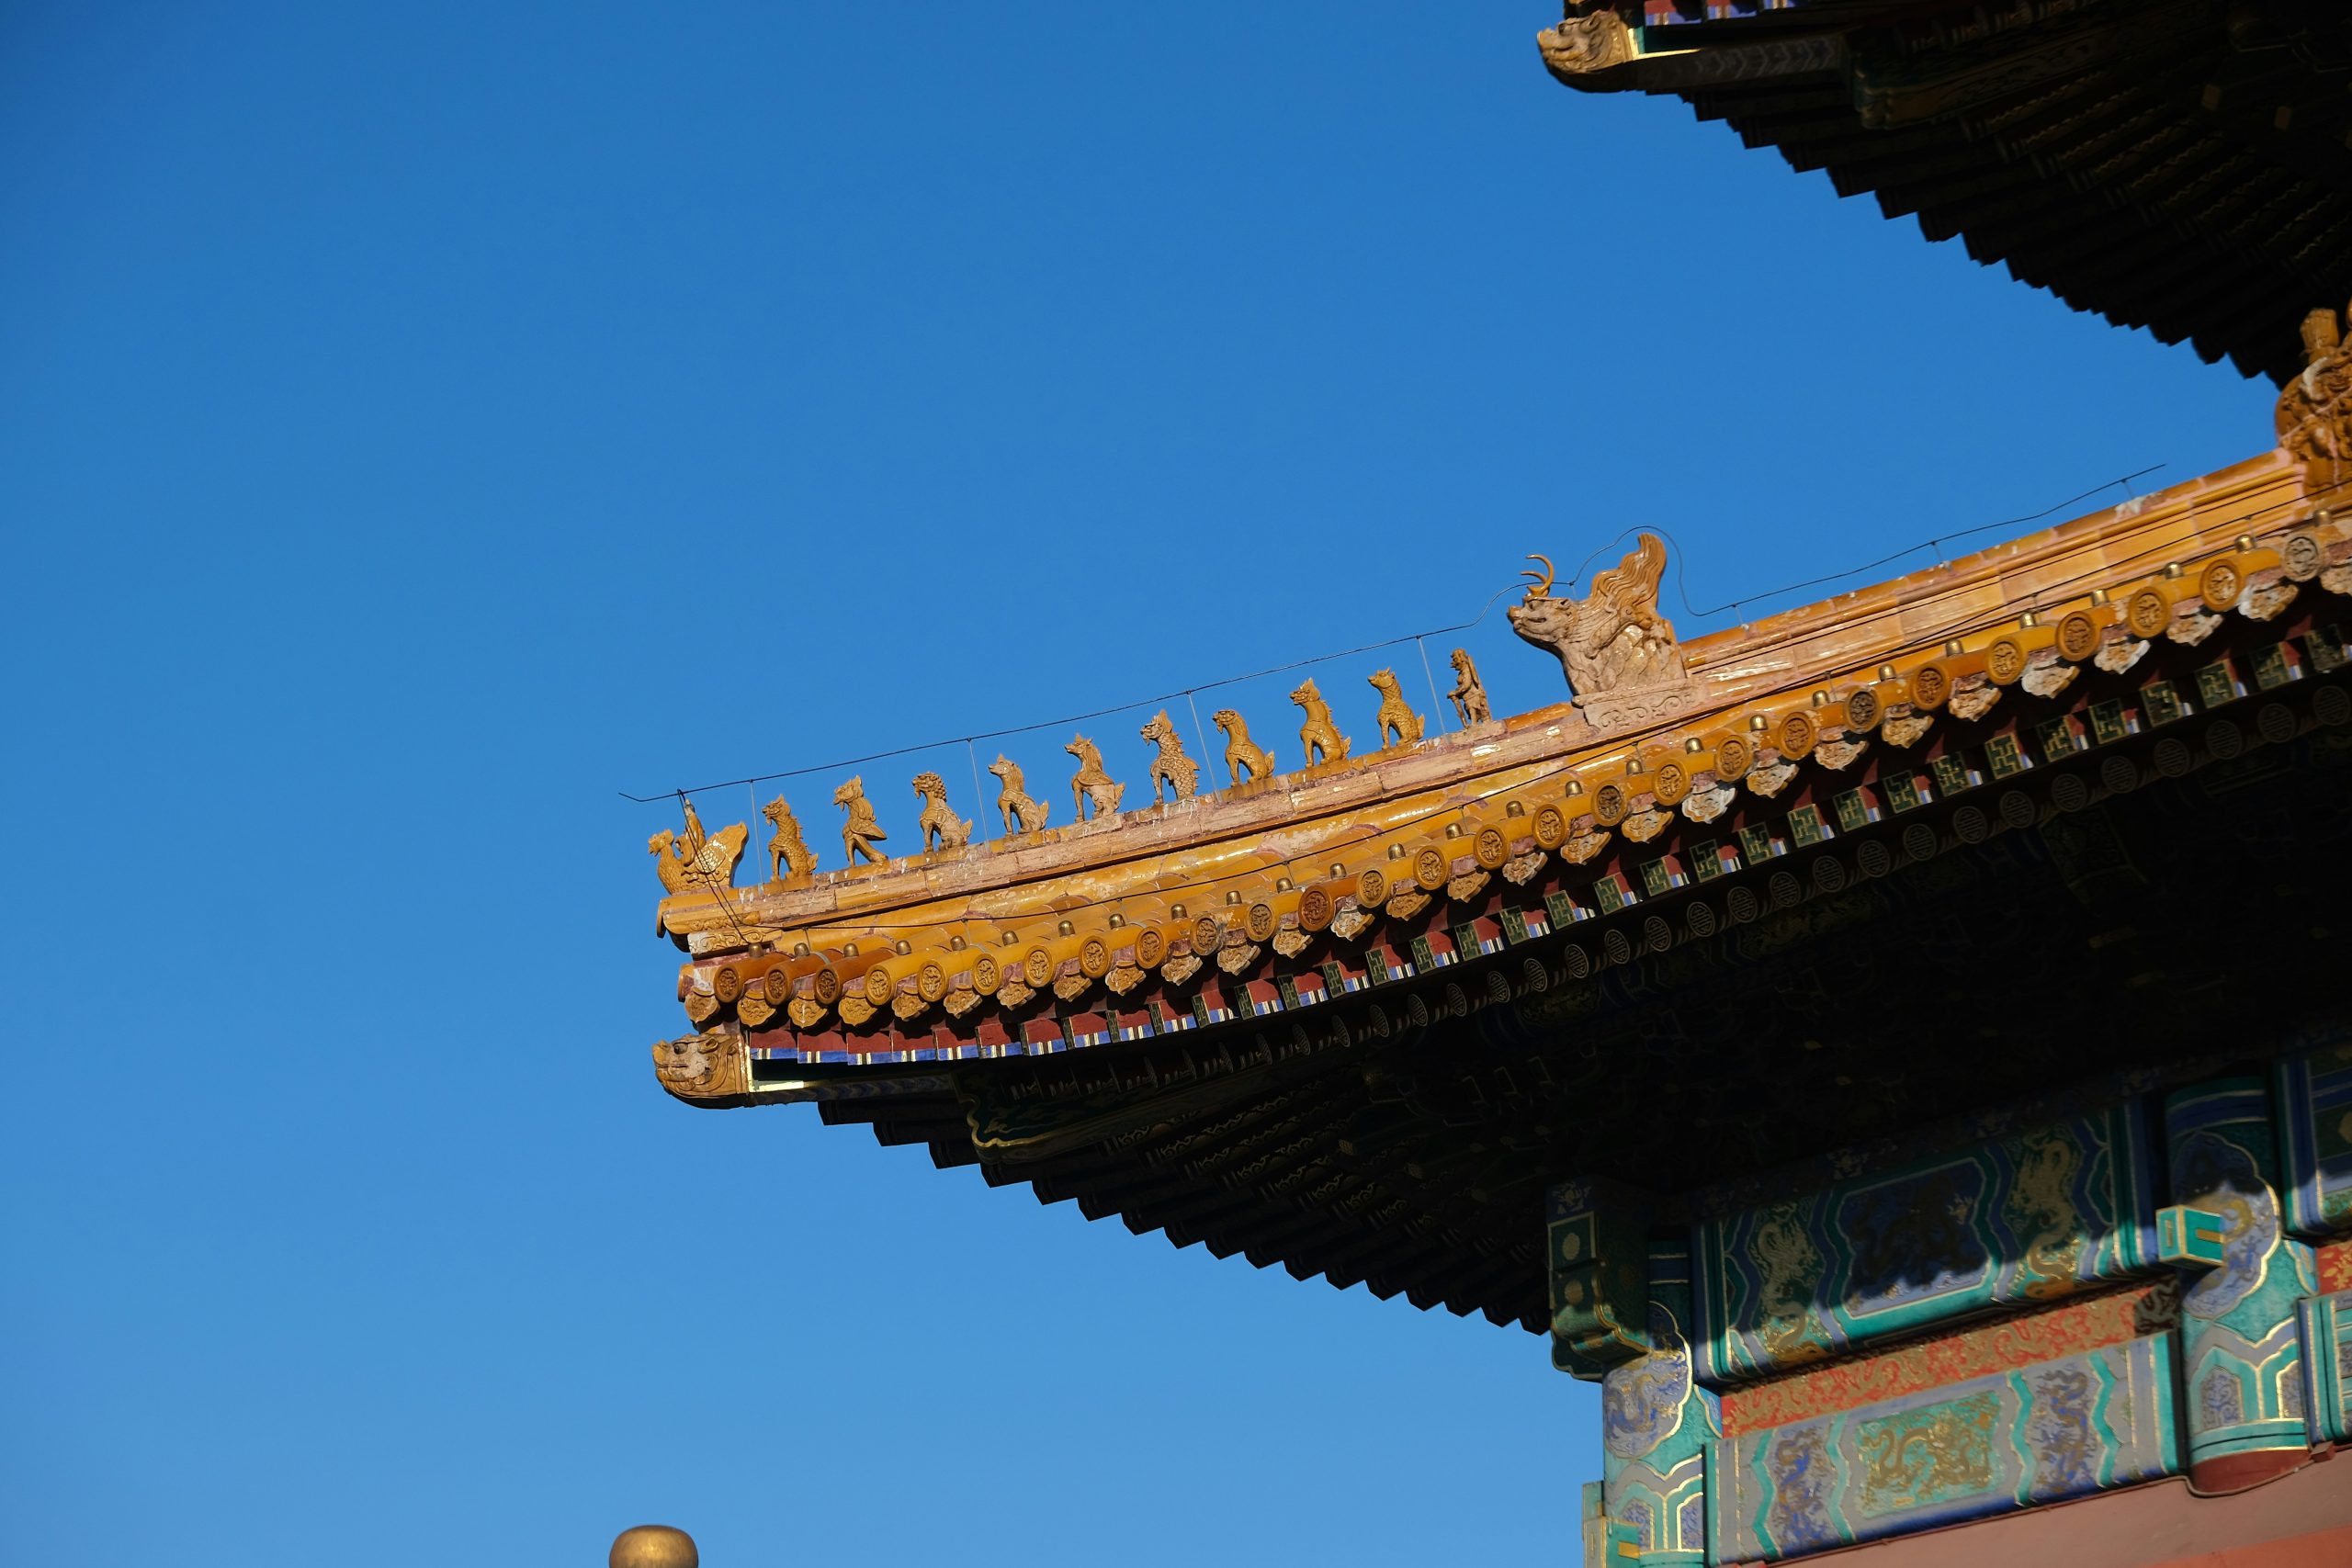 discover the charm and history of beijing's hutongs with our immersive exploration tours. visit hidden gems, sample local cuisine, and experience authentic local culture.